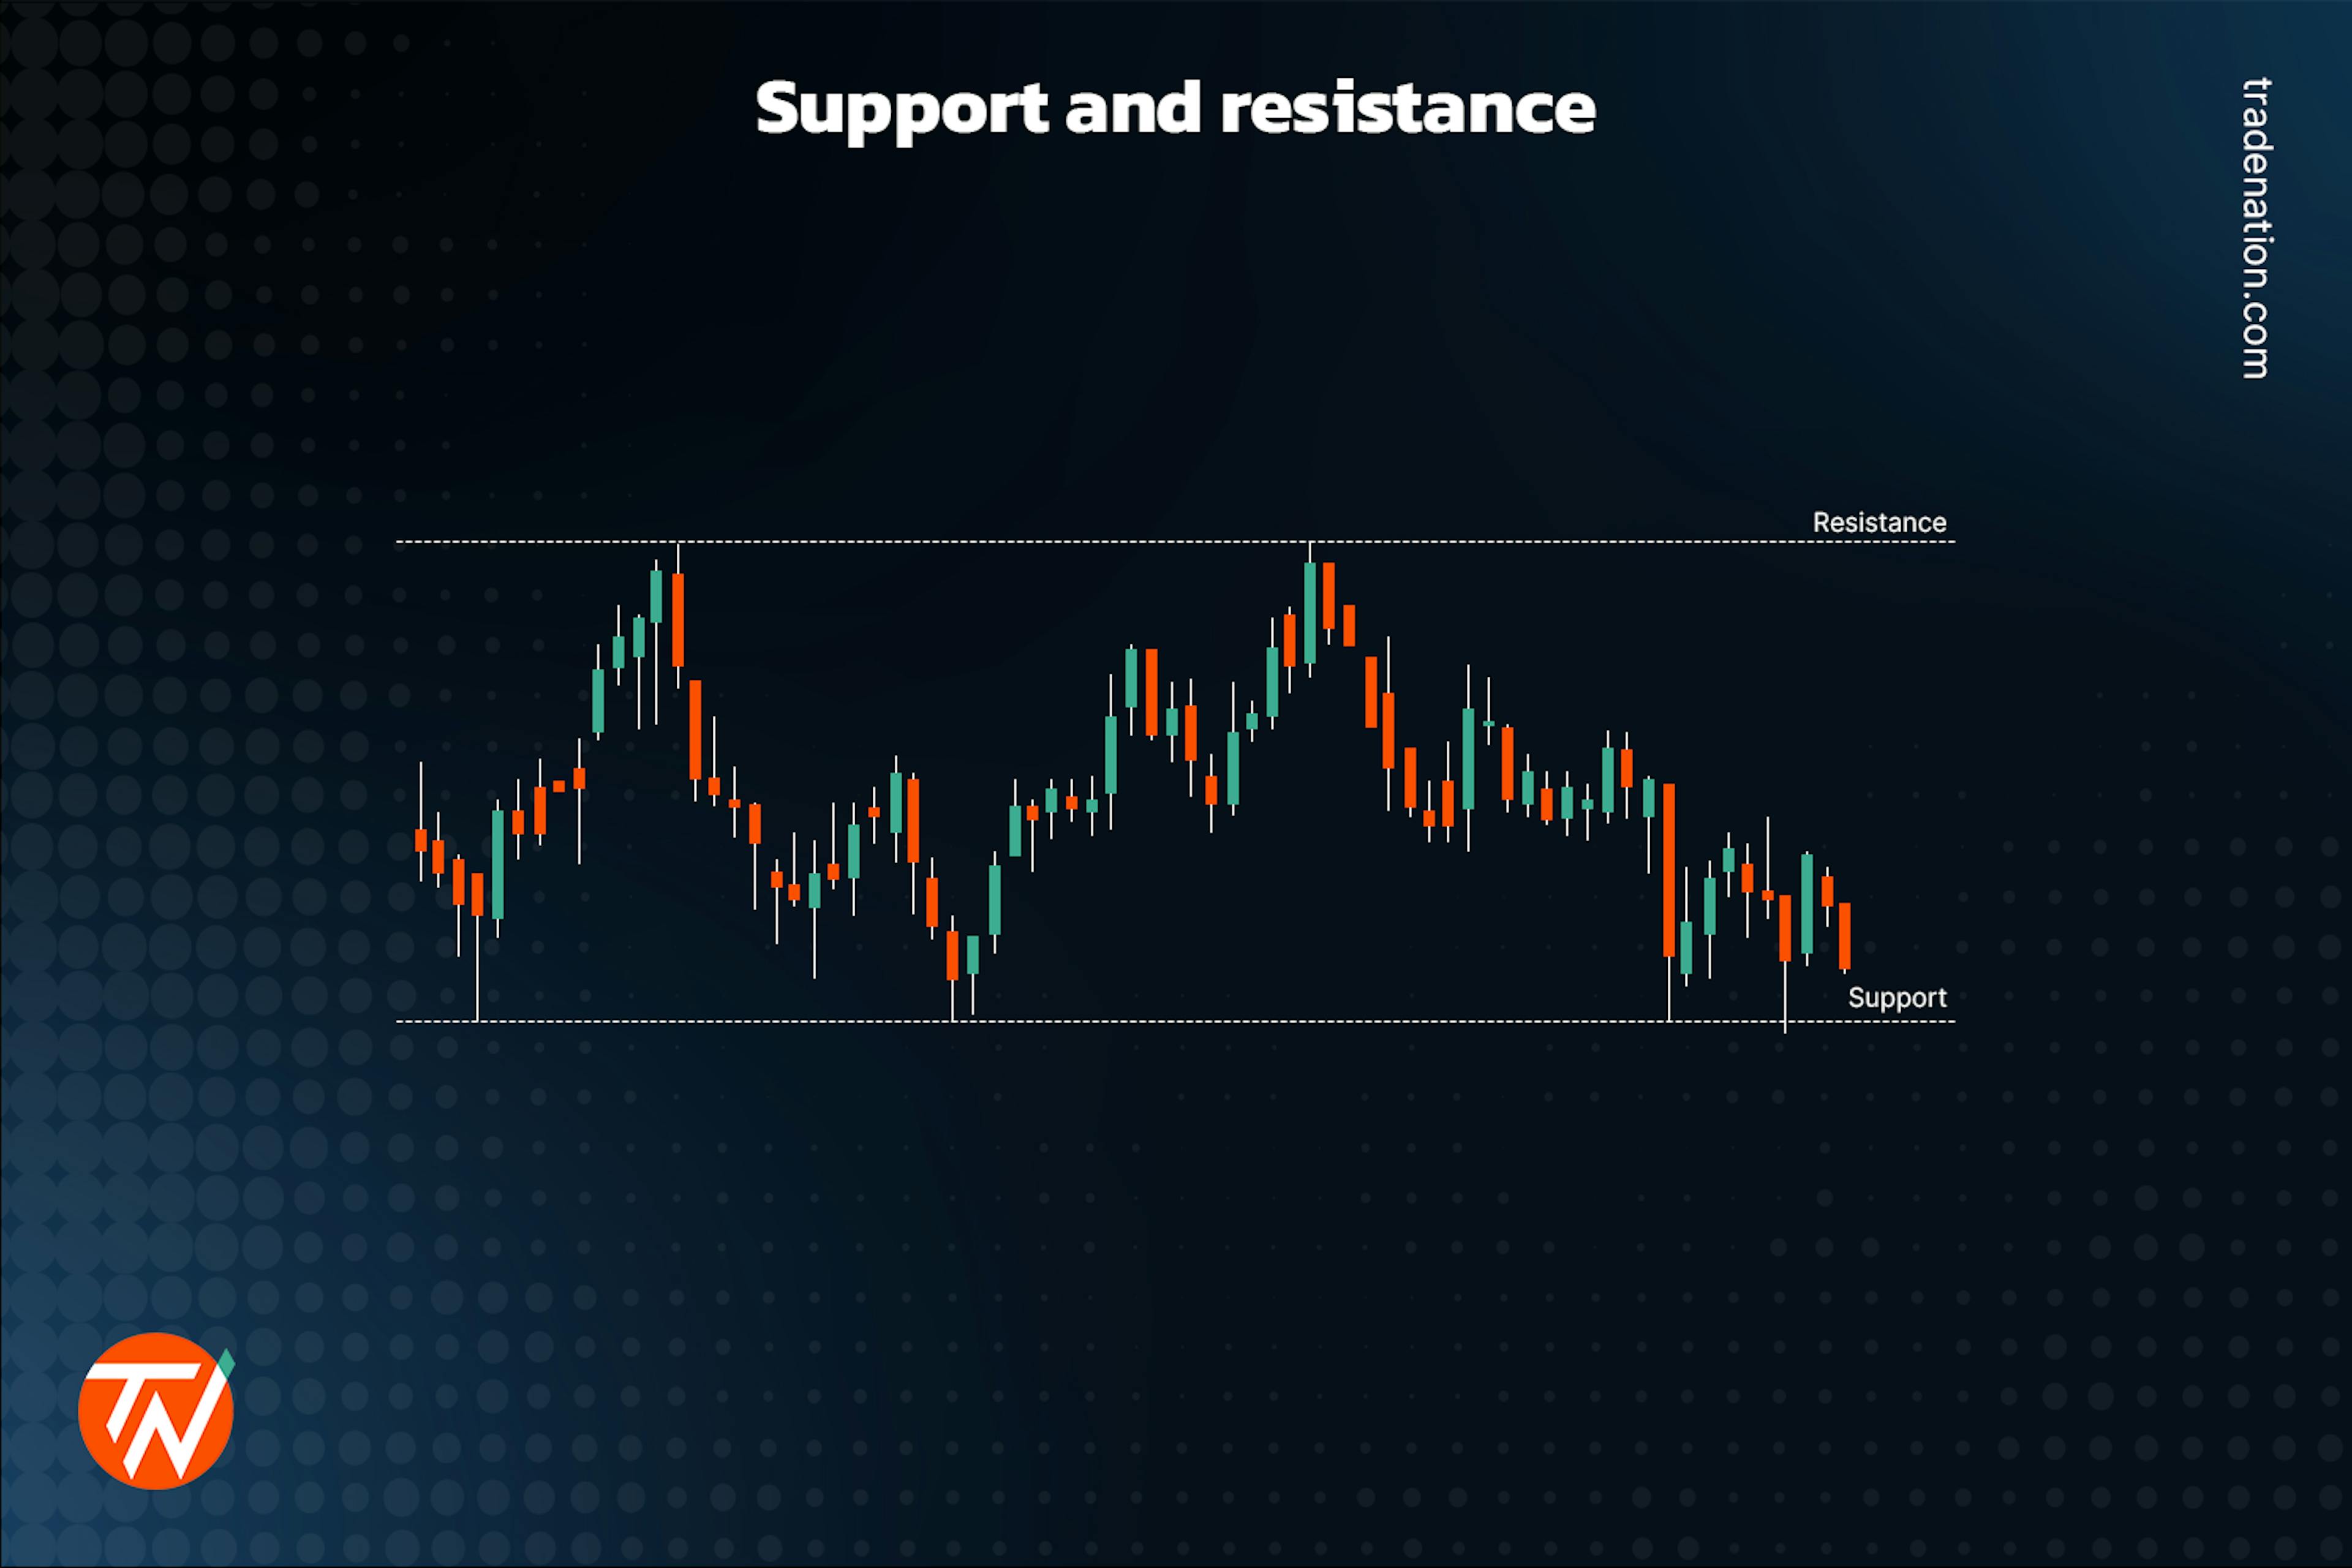 Support and resistance in trading explained